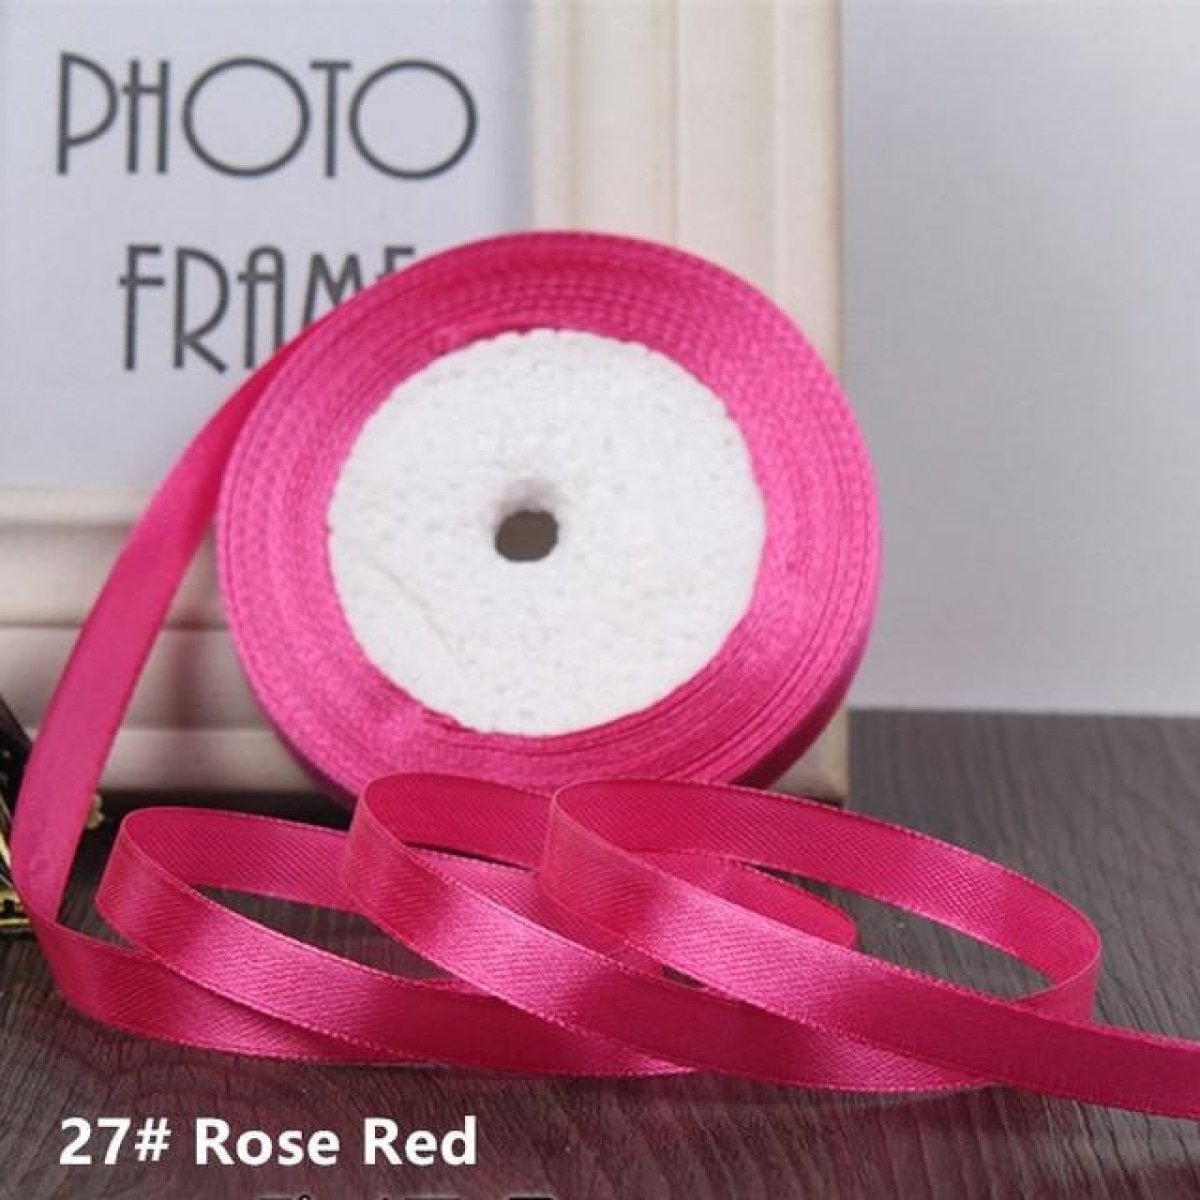 22m 10mm-15mm Polyester Ribbon for Crafts Bow Gift Wrapping Party Wedding Hair - Rose Red 15mm - - Asia Sell